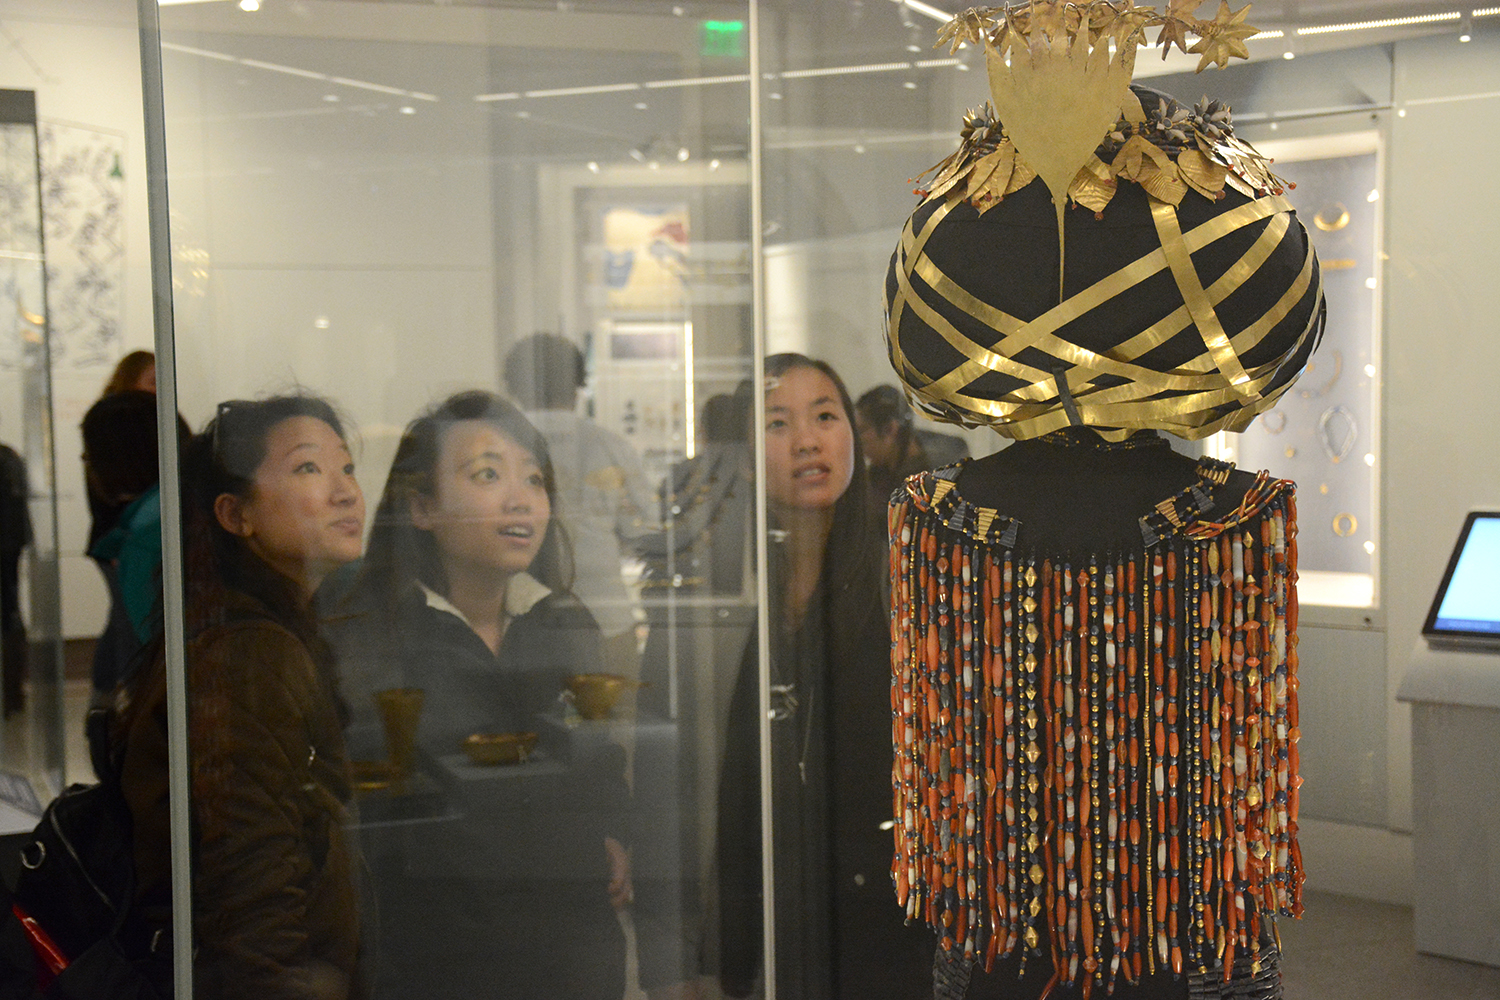 Students staring at Queen Puabi's headdress through glass case